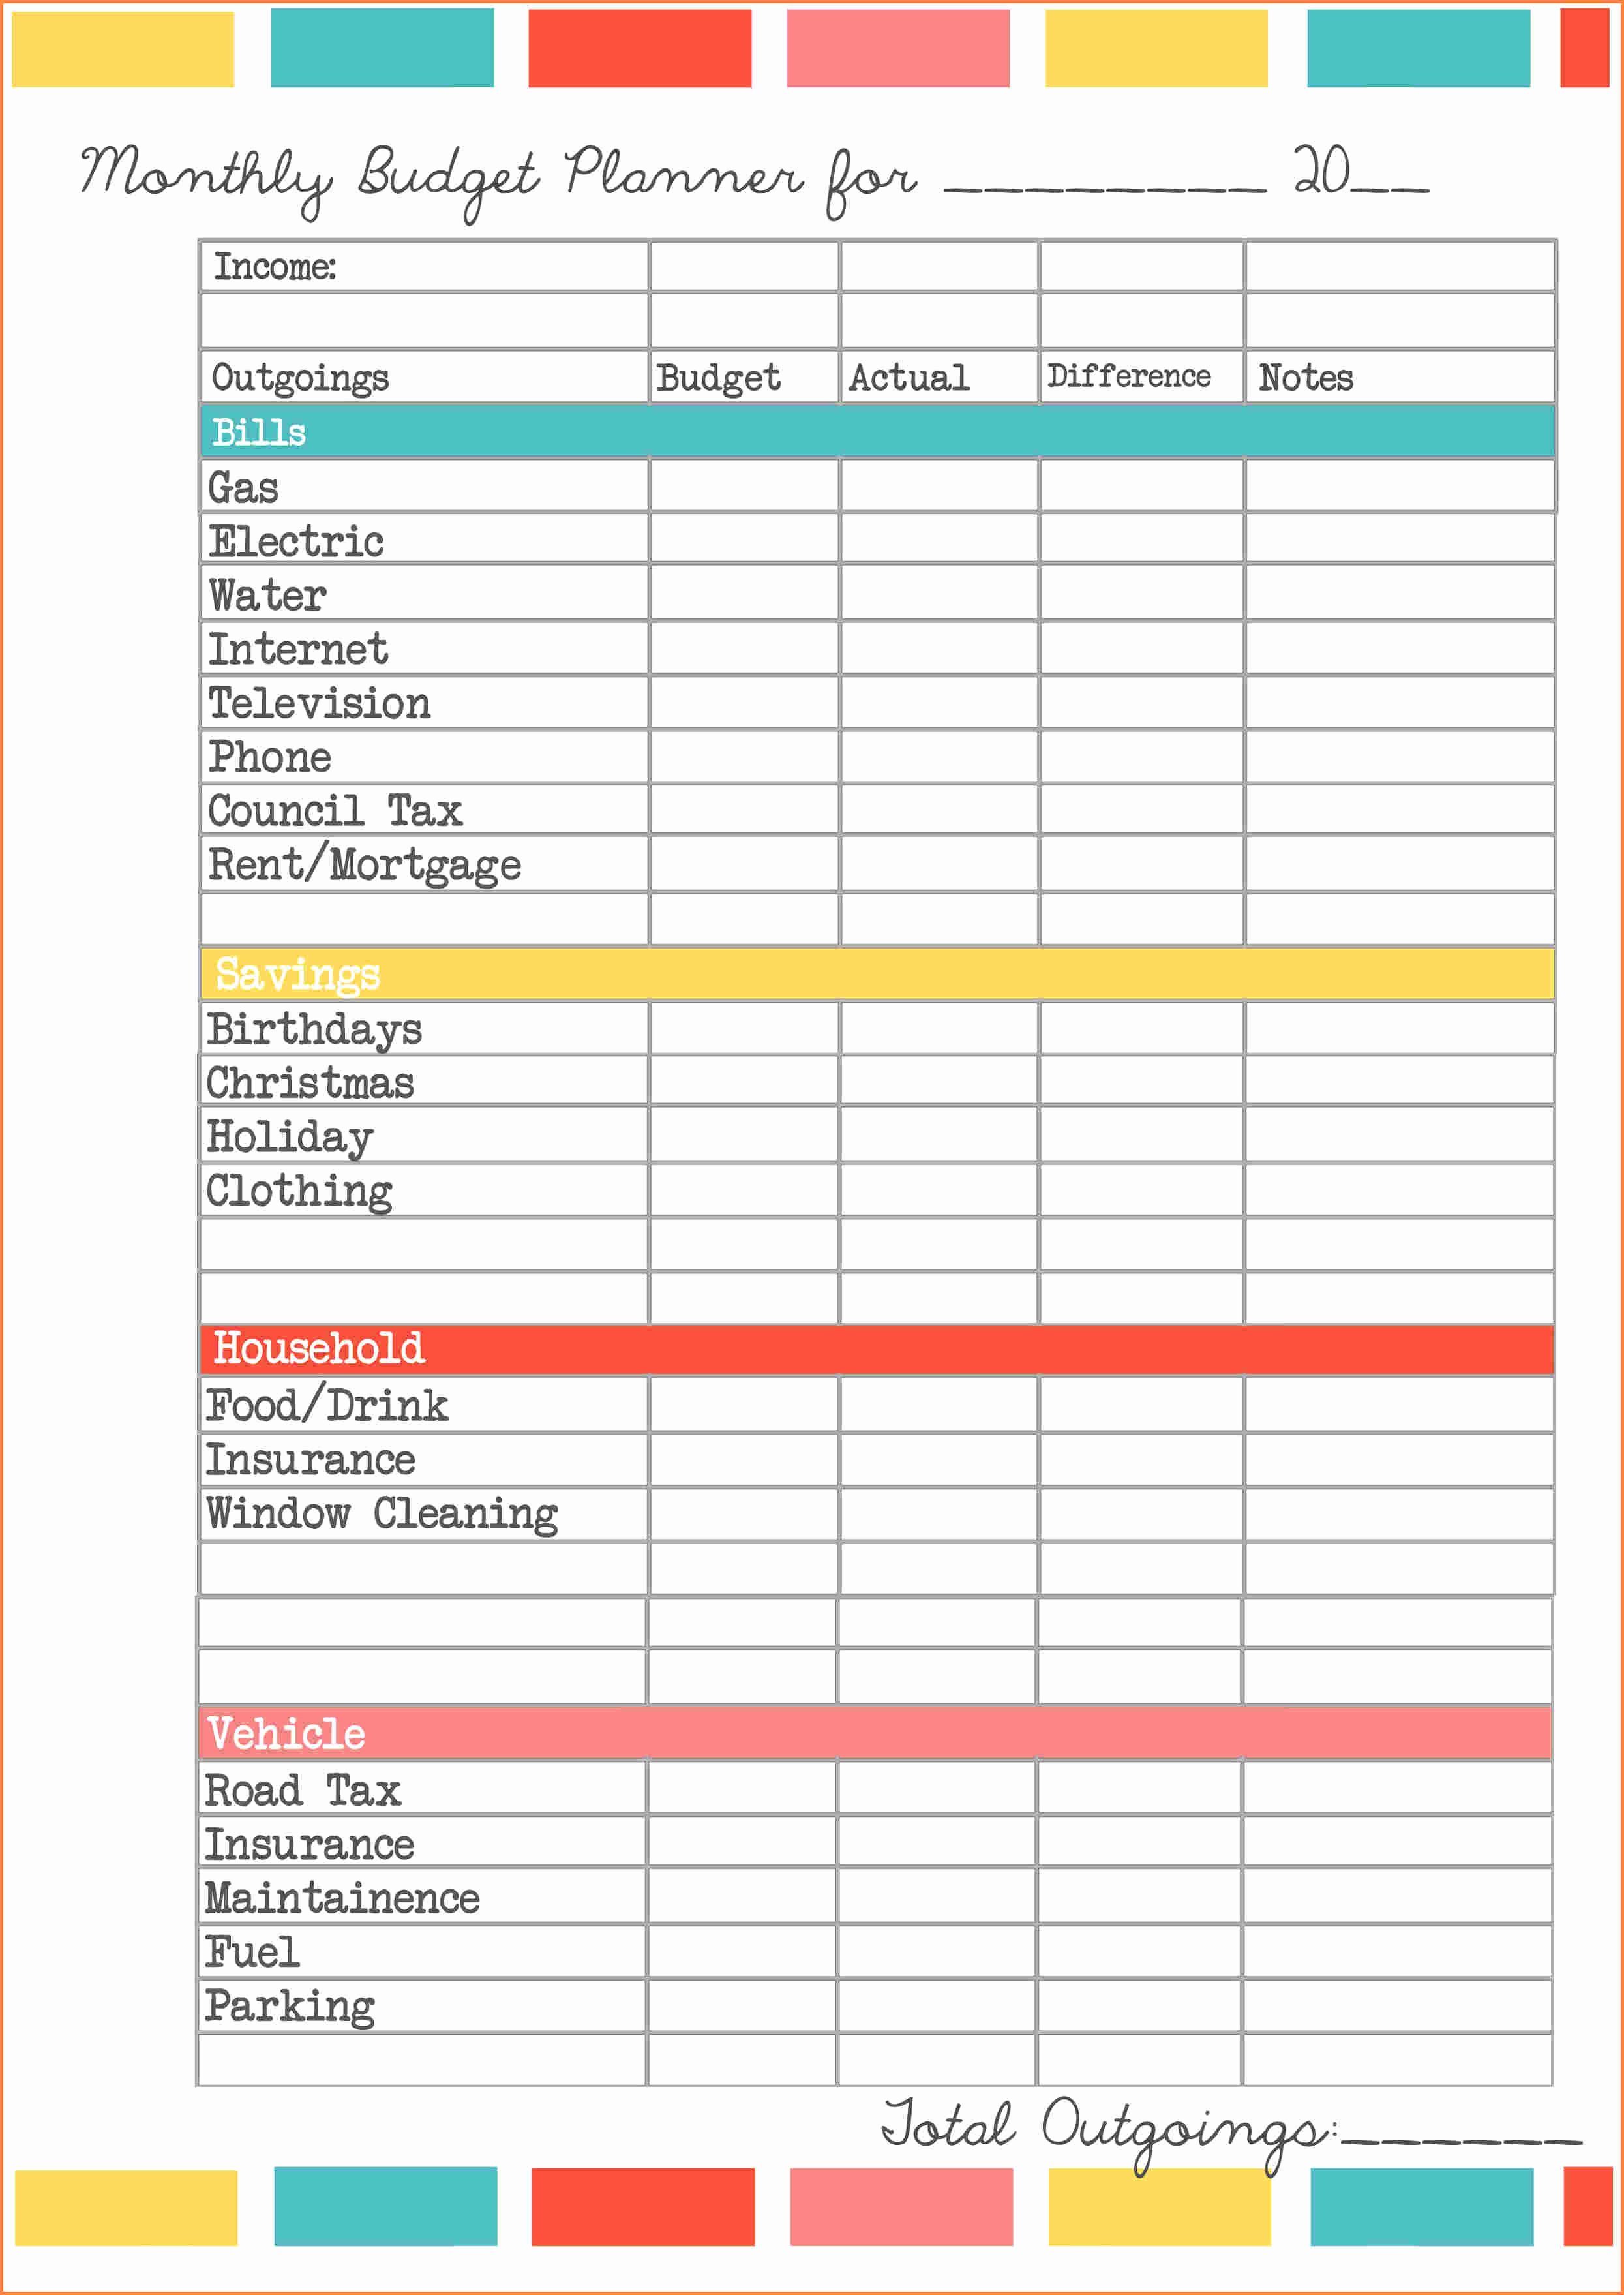 Monthly Budget Worksheet Excel Best Of 10 Monthly Bud Planner Spreadsheet